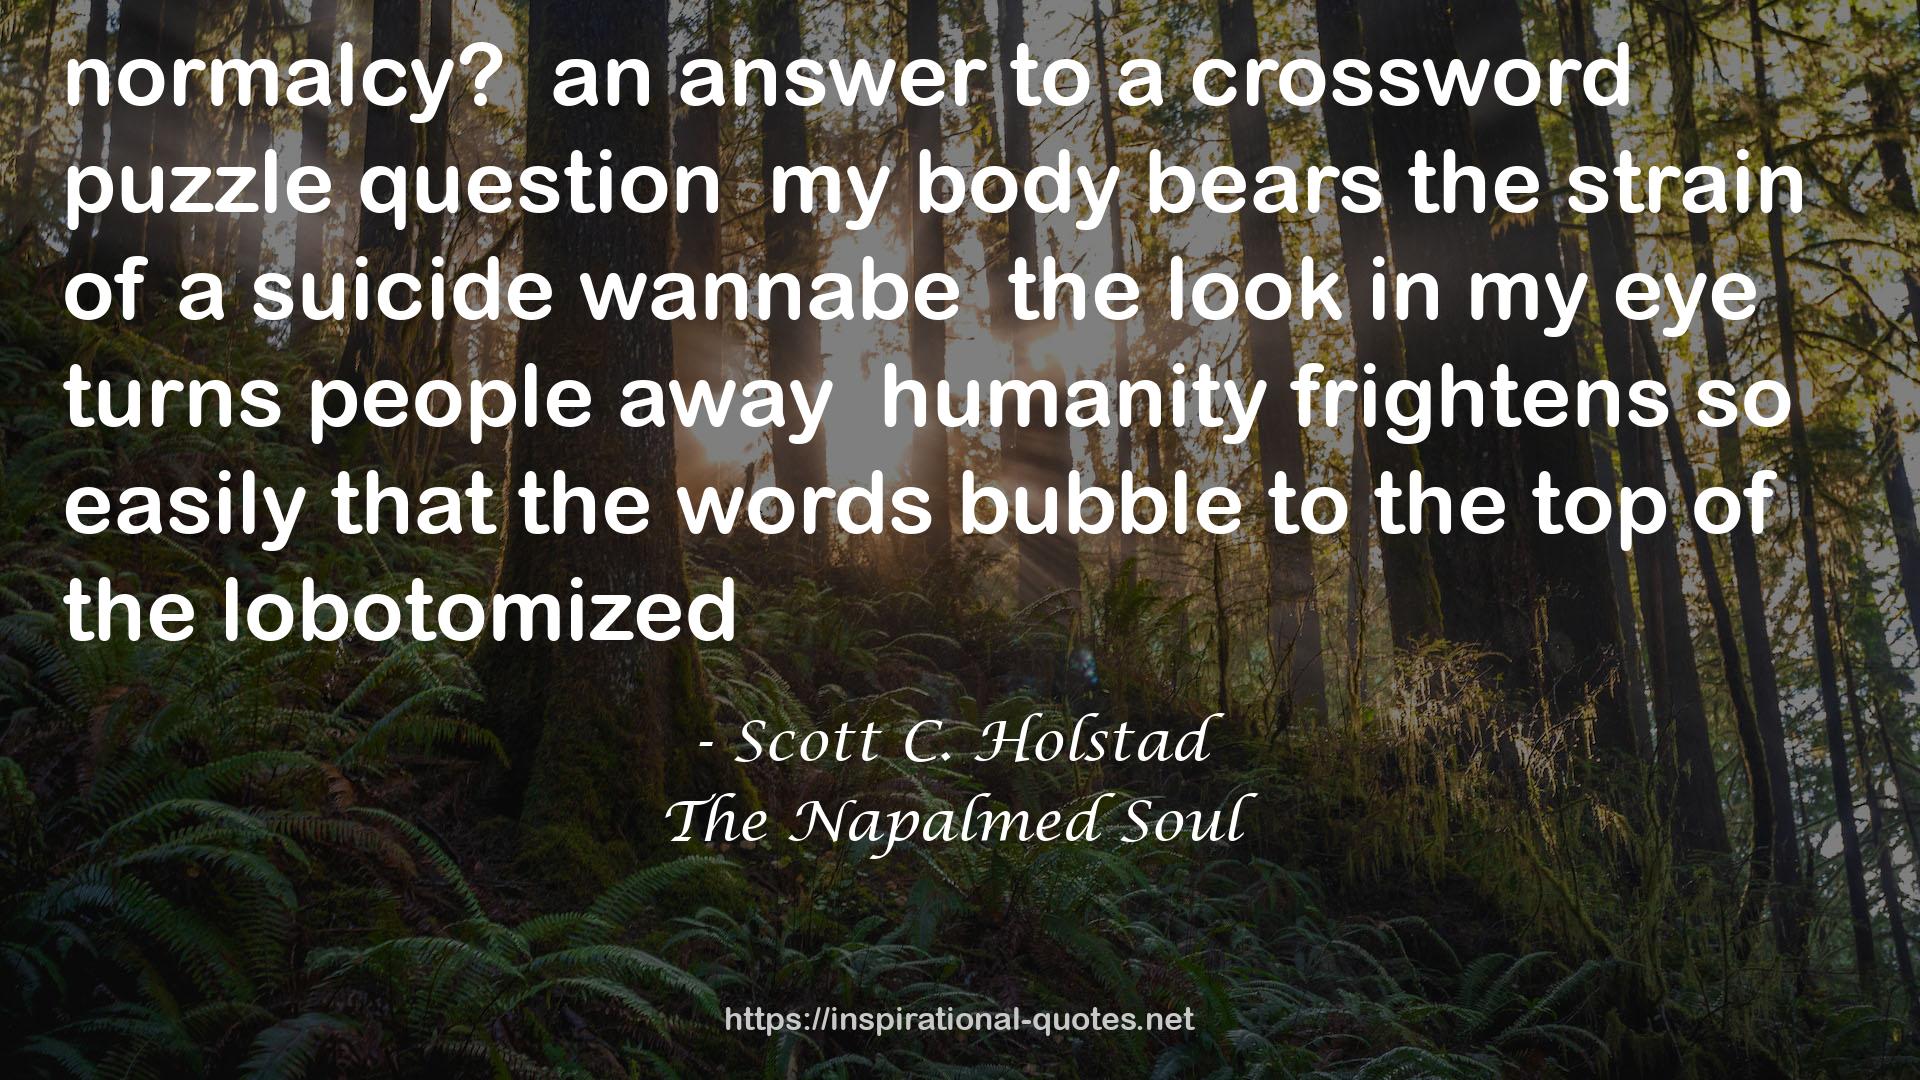 Scott C. Holstad quote : normalcy?<br /><br />an answer to a crossword puzzle question<br /><br />my body bears the strain of a suicide wannabe<br /><br />the look in my eye turns people away<br /><br />humanity frightens so easily that the words bubble to the top of the lobotomized